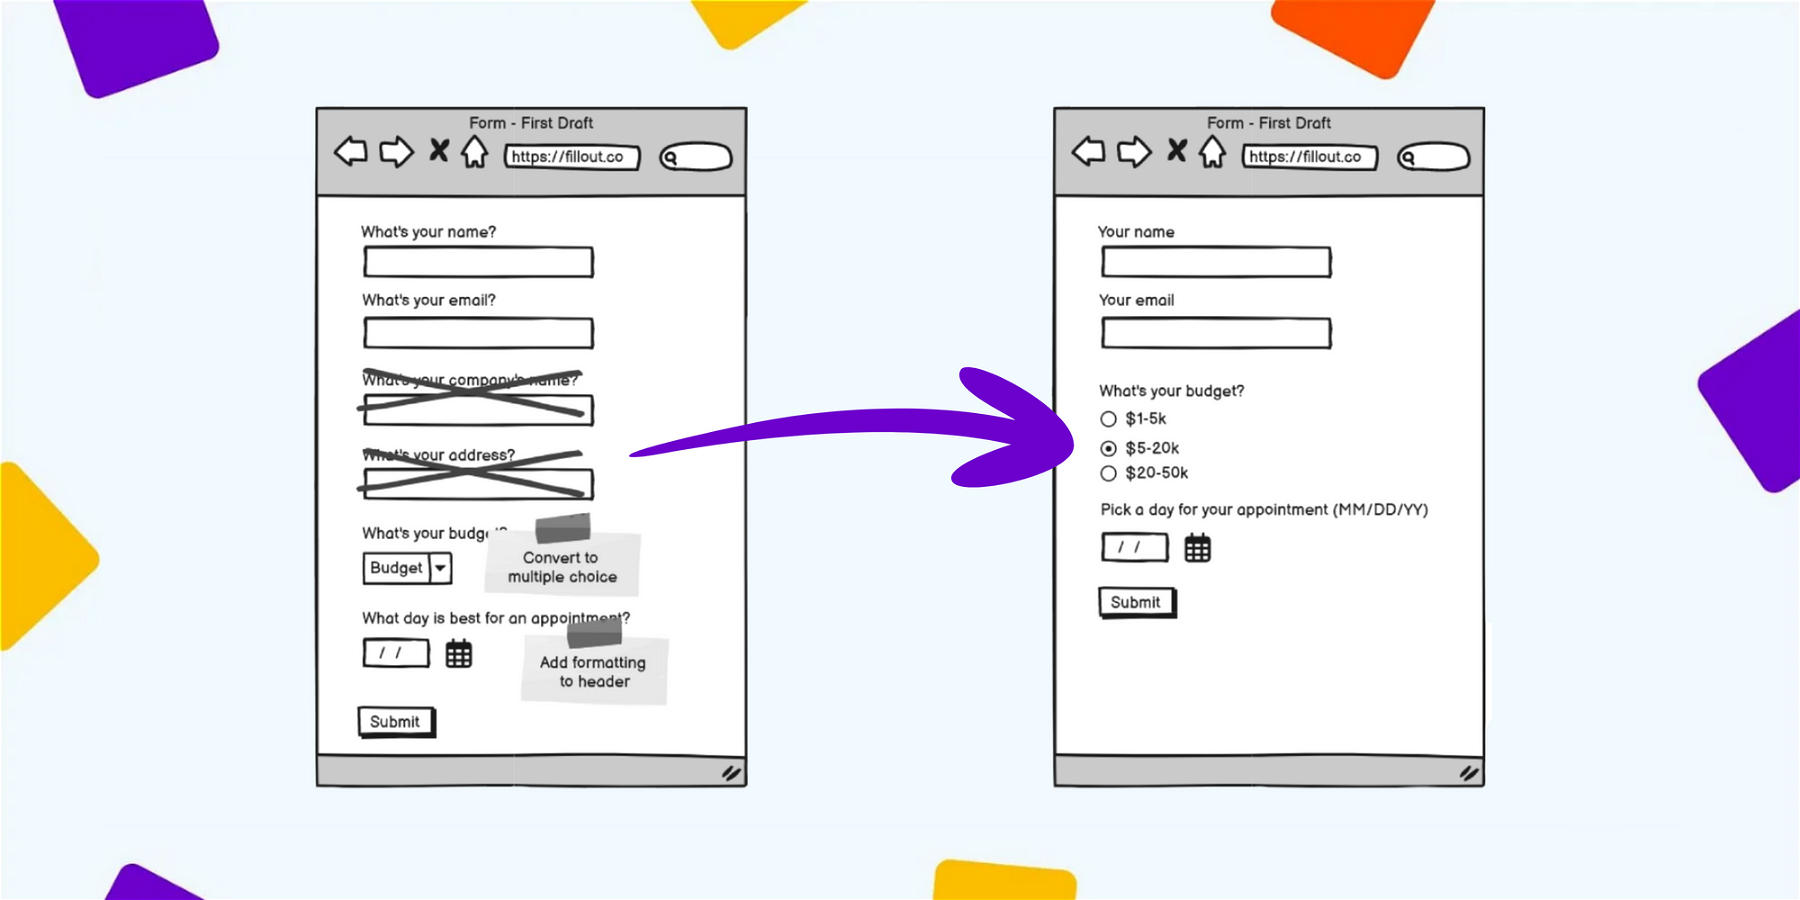 5 UX tips to boost form conversions